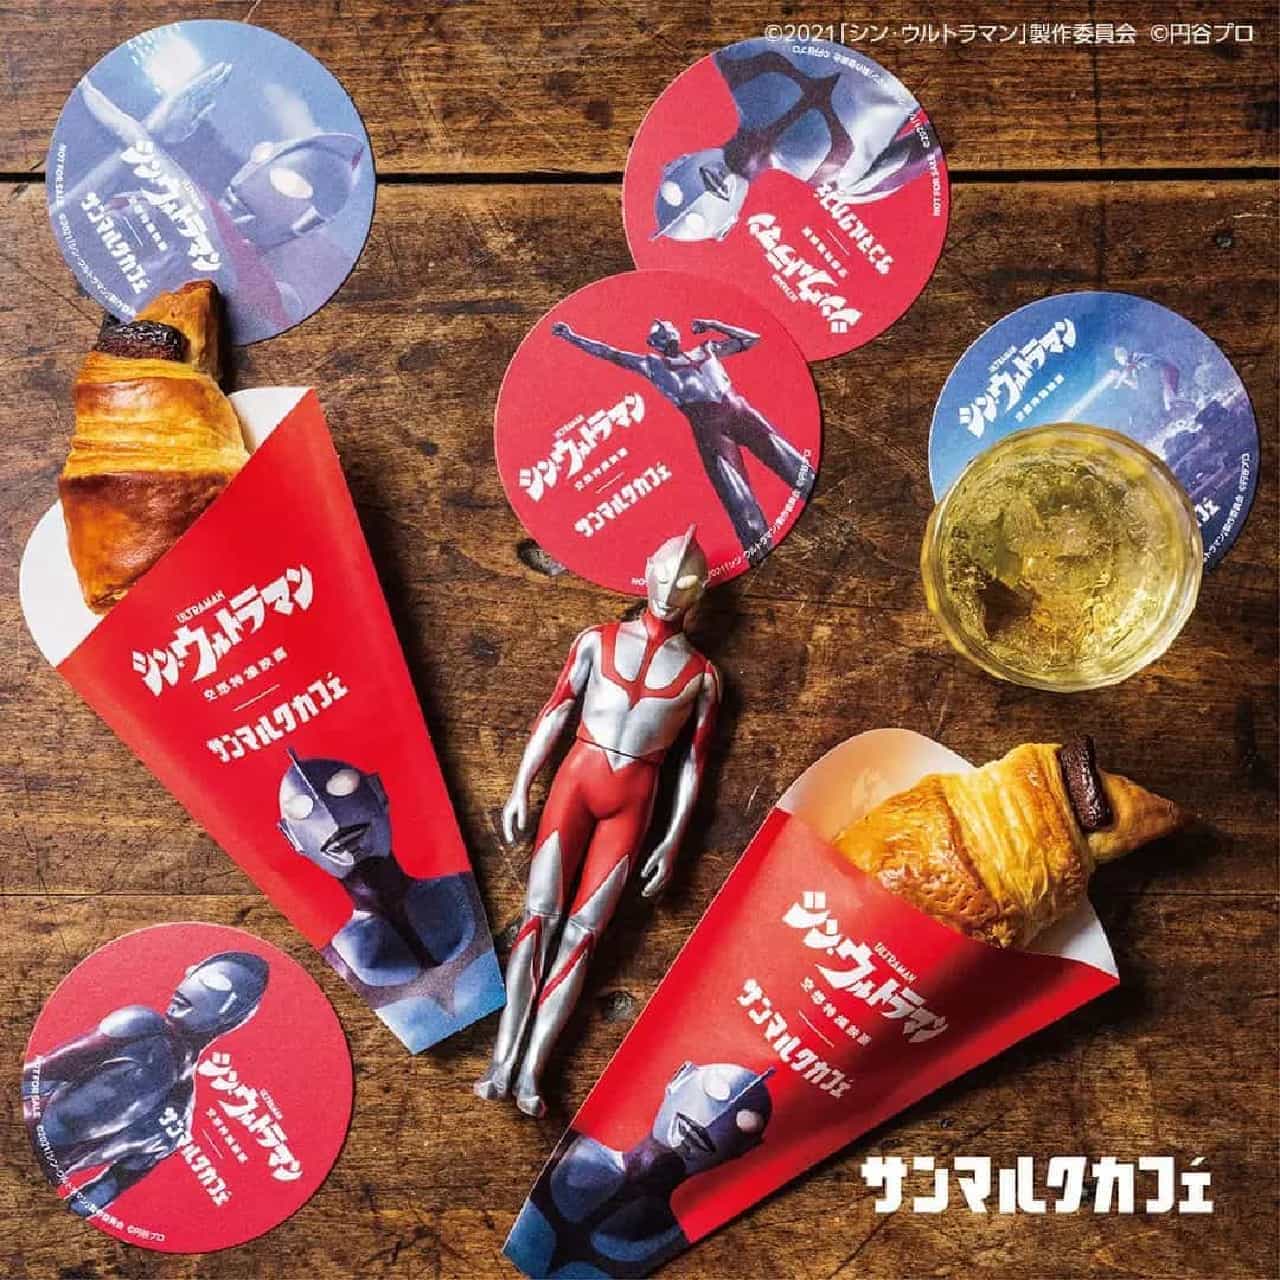 Tie-up campaign between St. Mark's Cafe and the movie Shin Ultraman